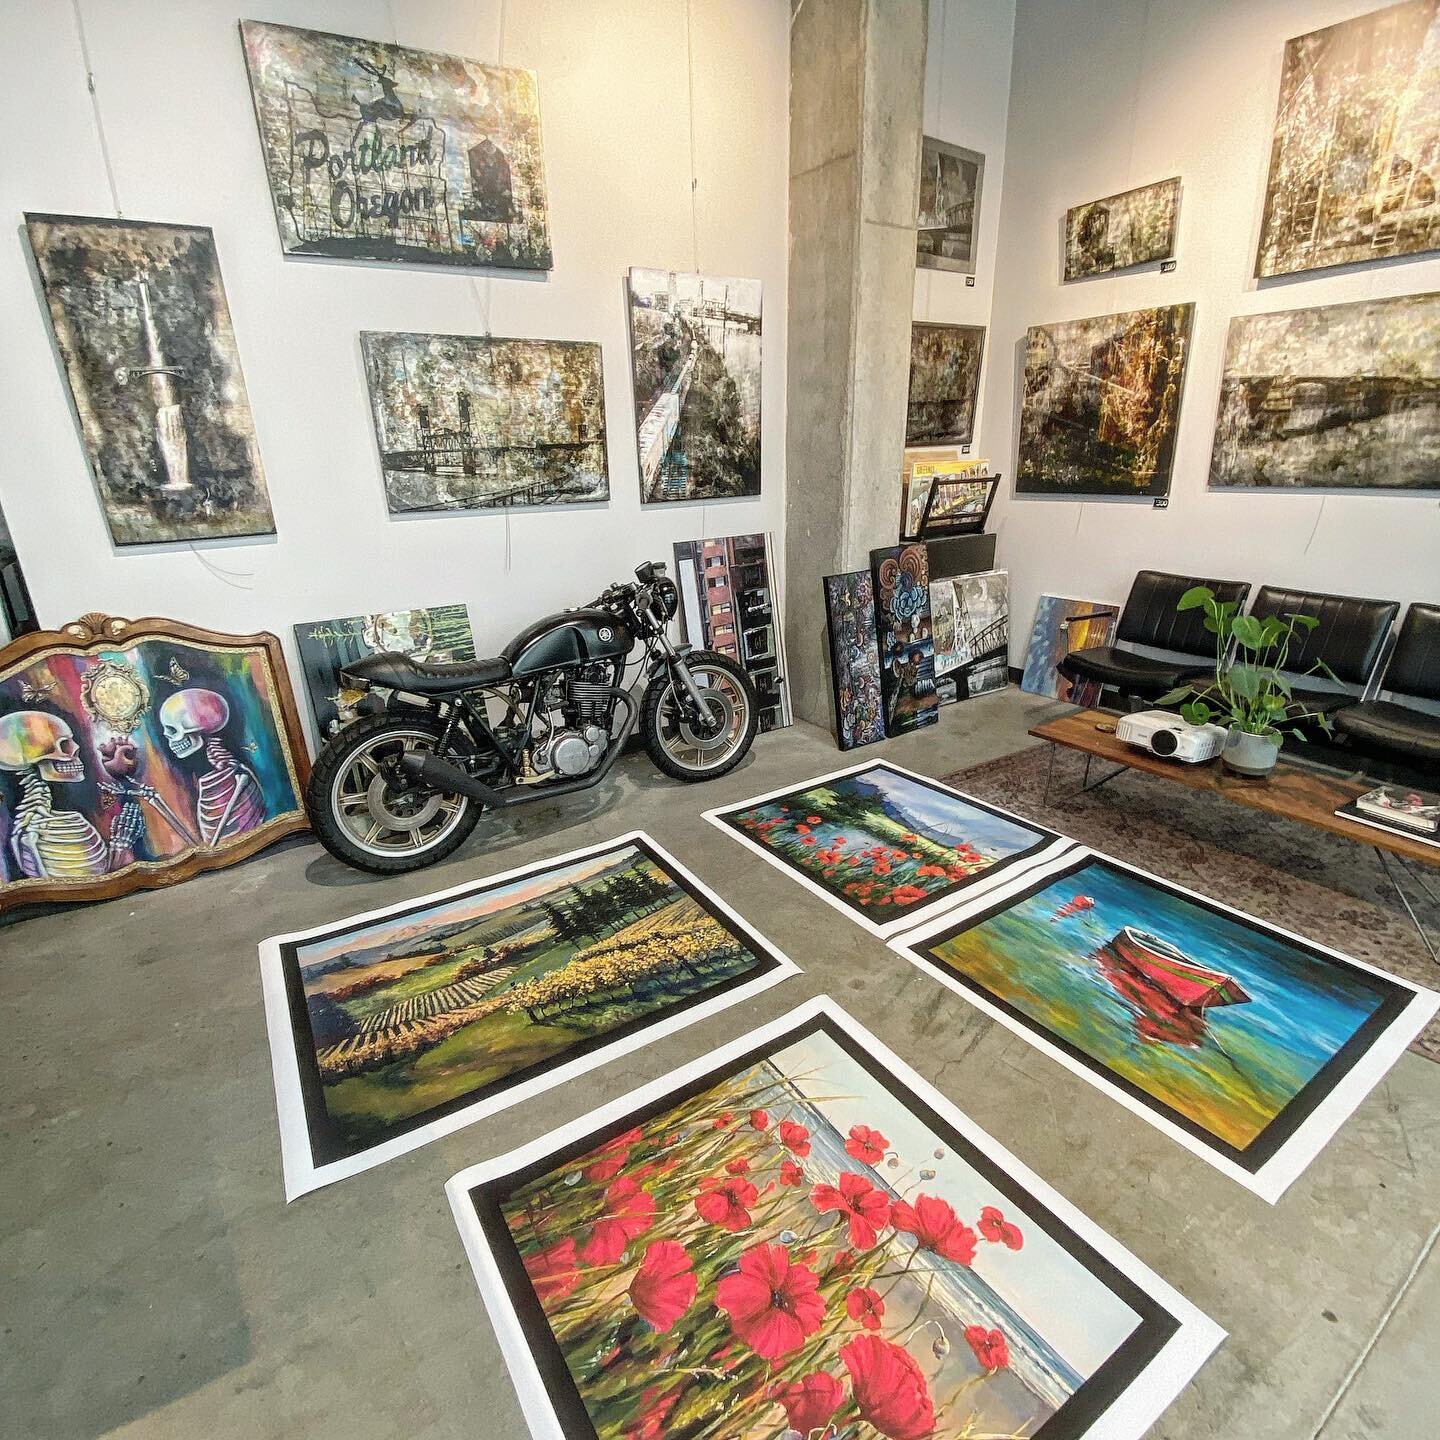 When you run out of space on your drying rack and tables you gotta improvise. #floor #flowers #poppies #oils #watercolor #motorcycle #fineart #art #printing #prints #pdxart #pdxartist #pdx #local #smallbusiness #portland #oregon #pnw #artwork #print 